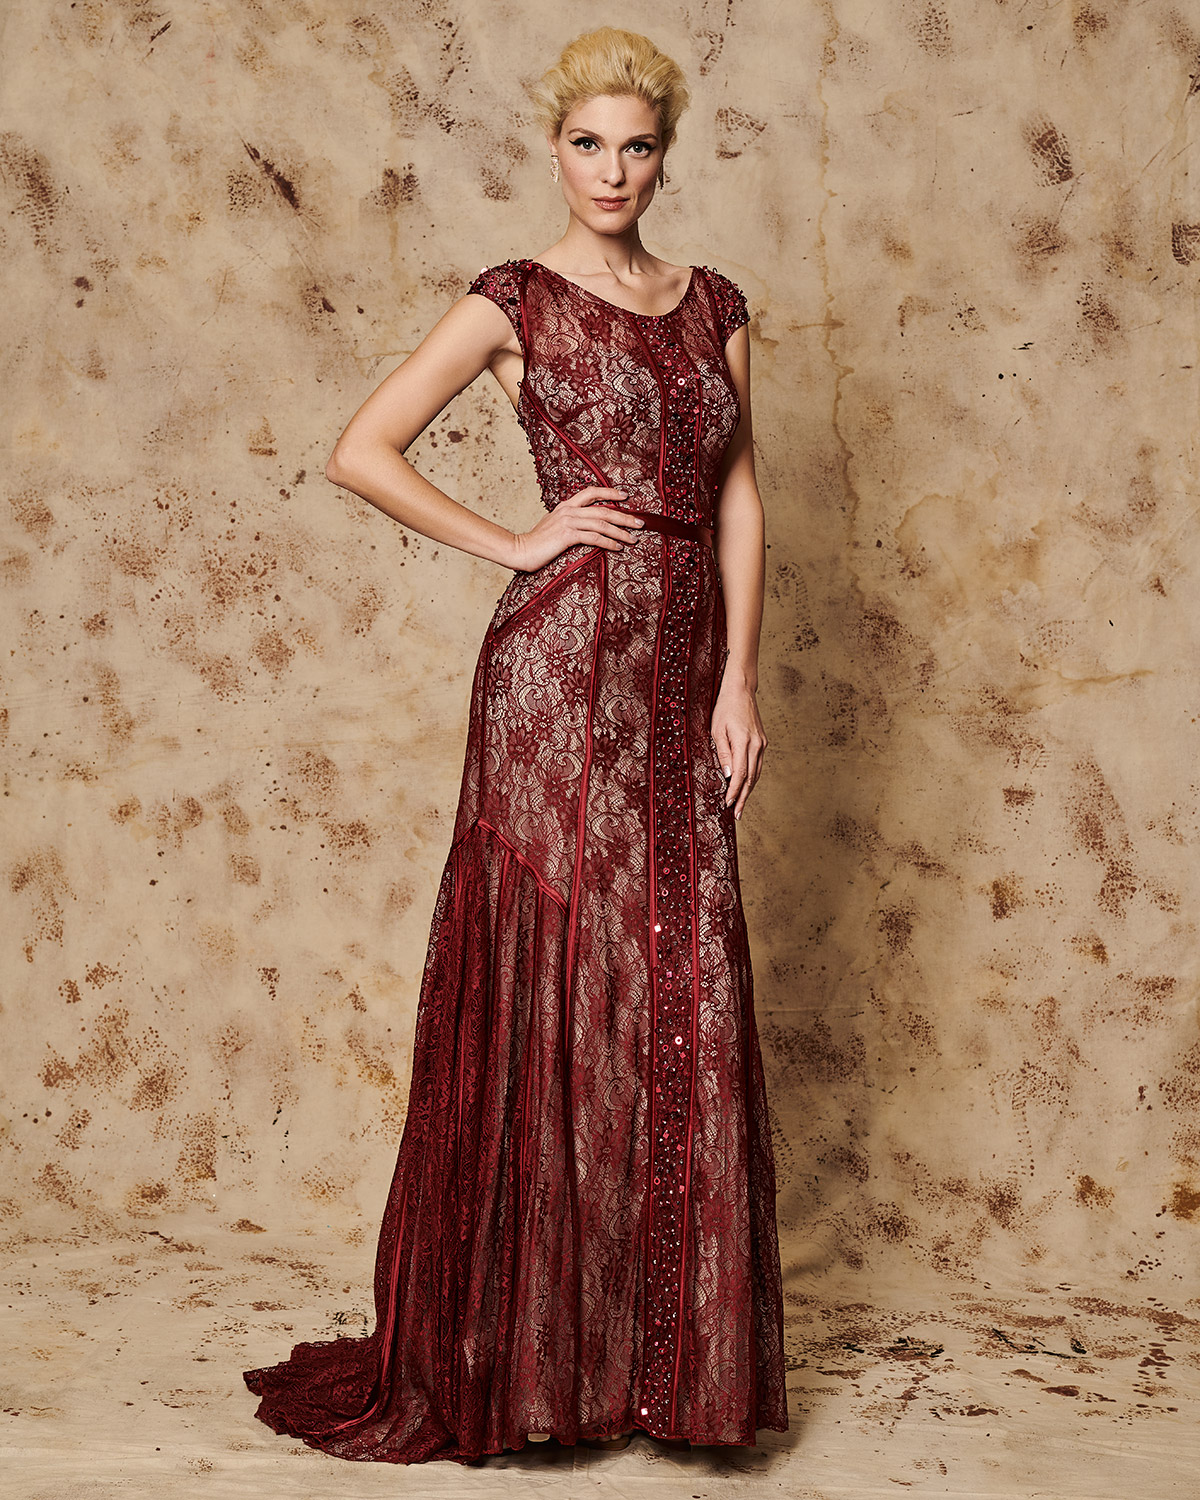 Classic Dresses / Long evening lace dress with beading